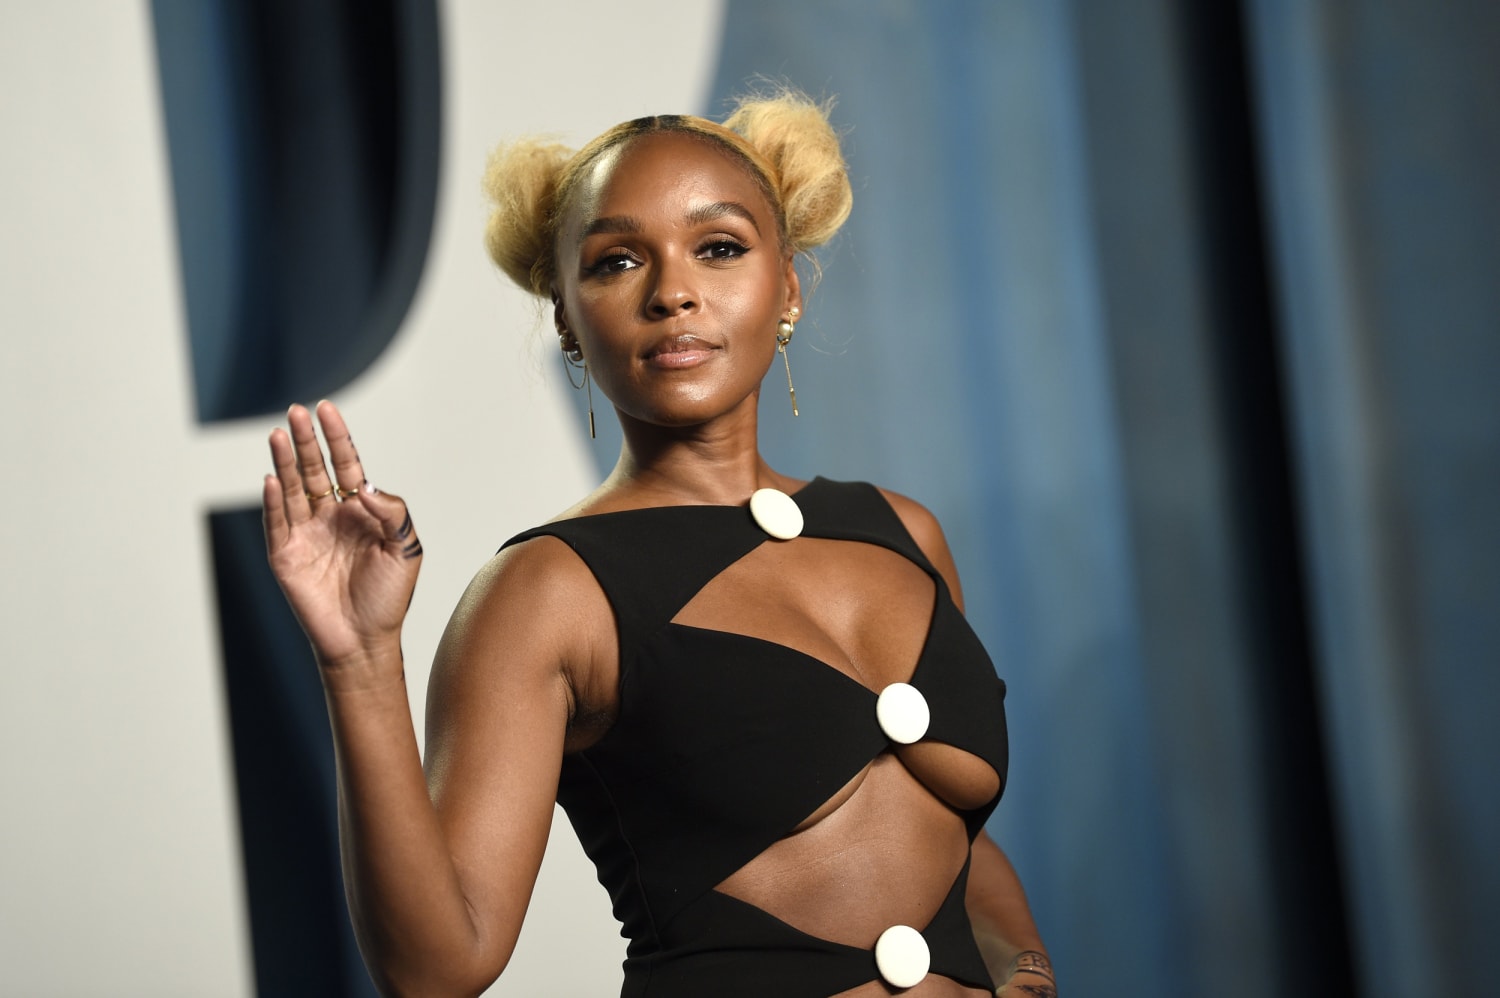 am Janelle Monáe confirms she's in new interview